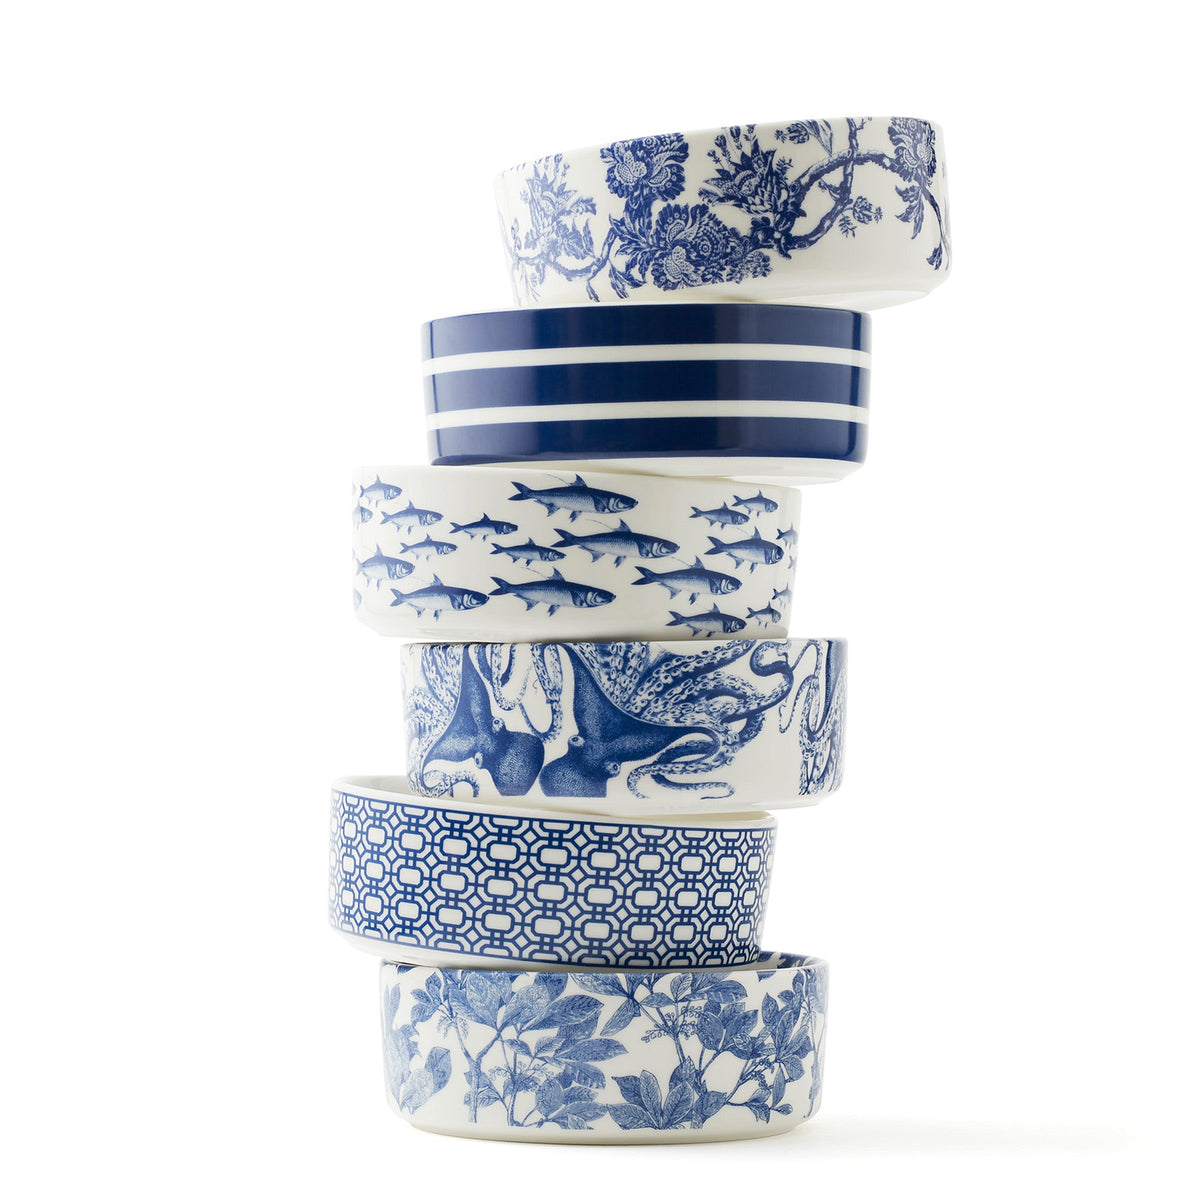 A stack of Caskata Lucy Large Pet Bowls, featuring a combination of blue and white colors.